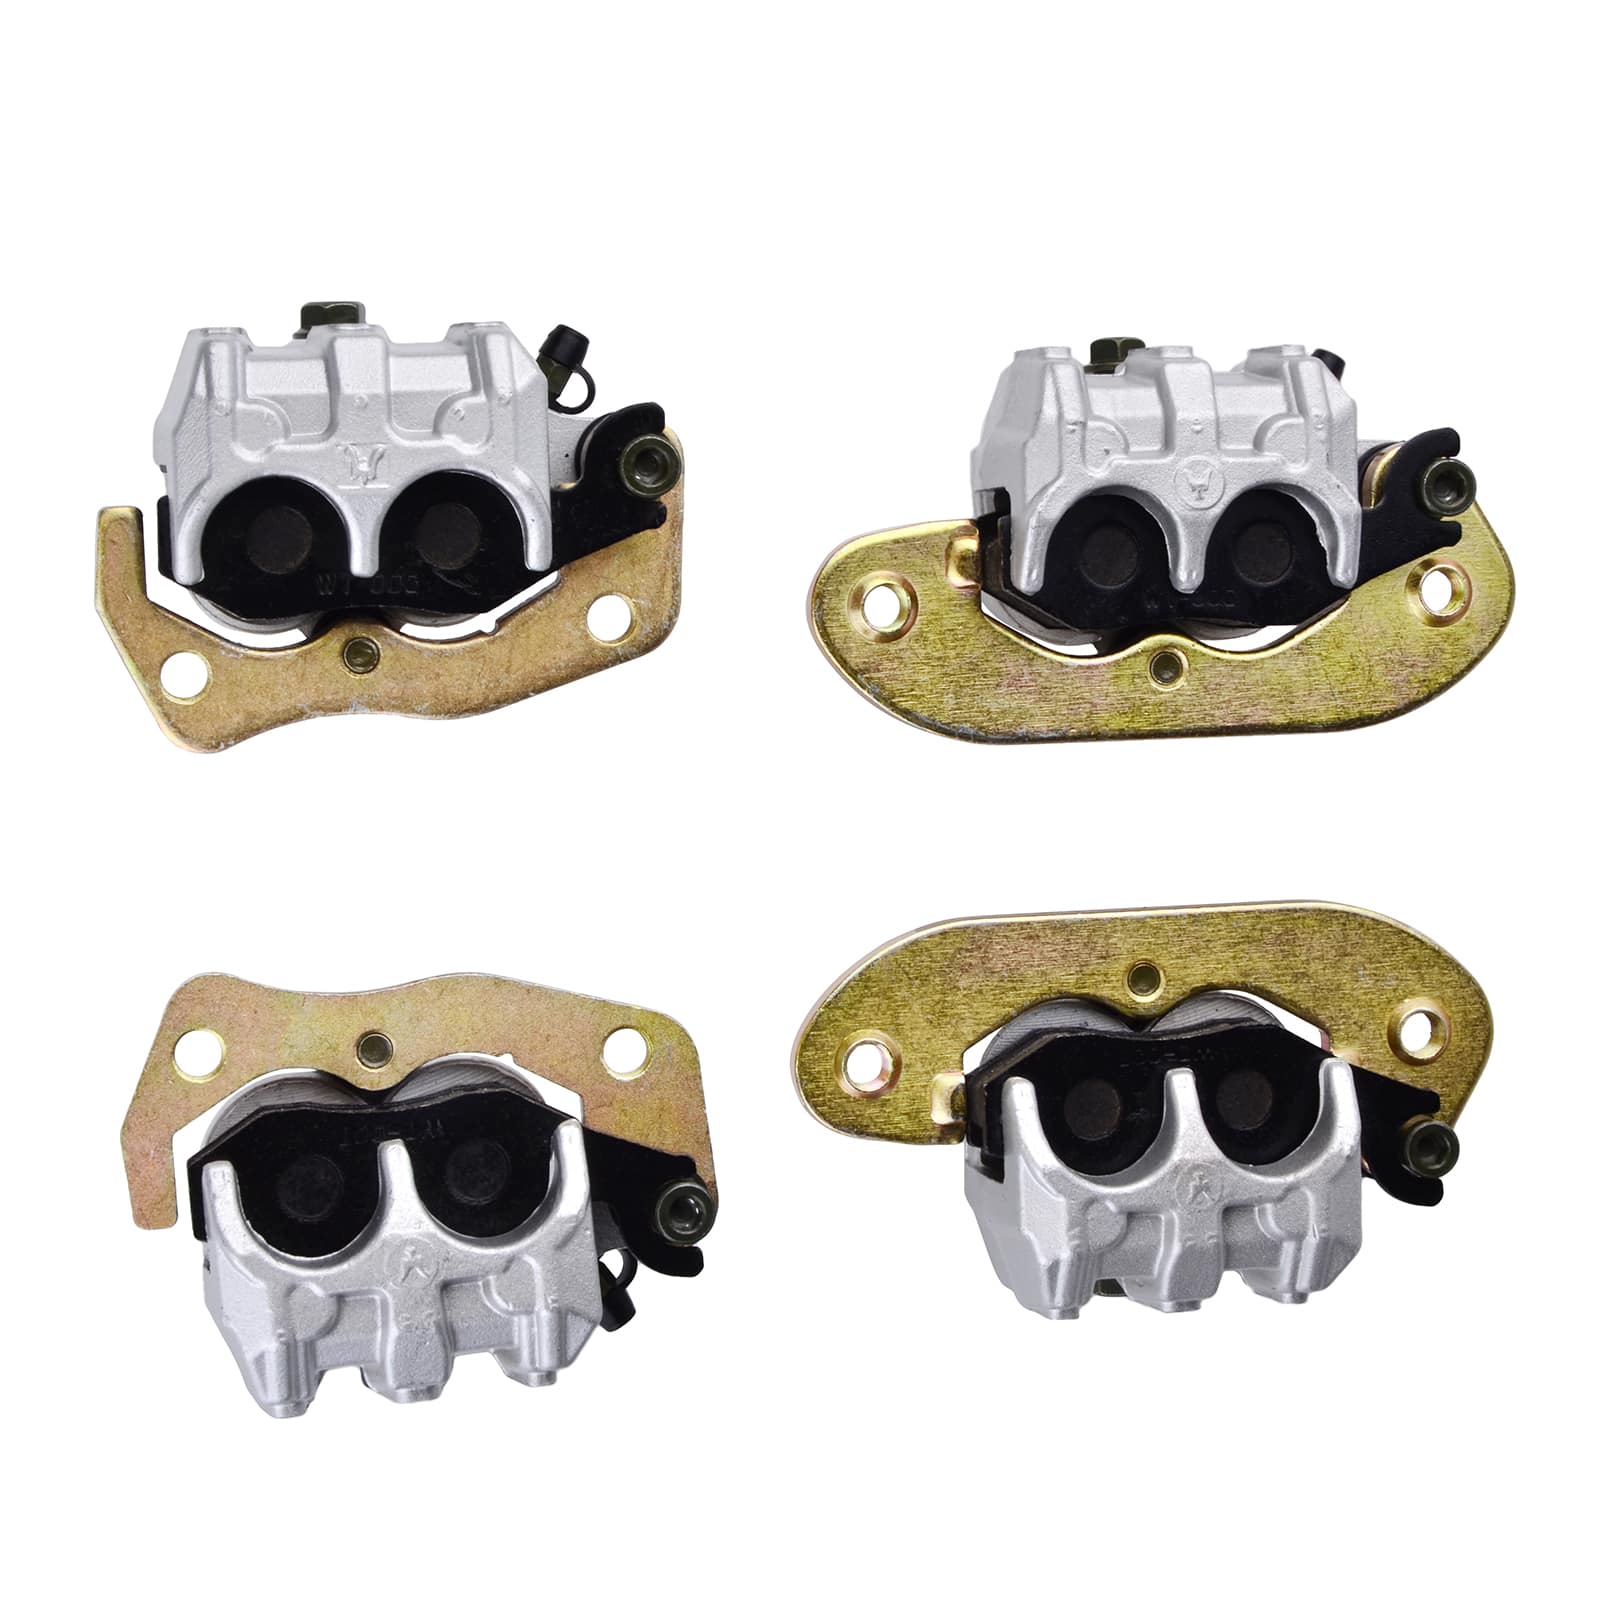 Front + Rear Brake Calipers Set with Pads for Yamaha ATV Rhino 700